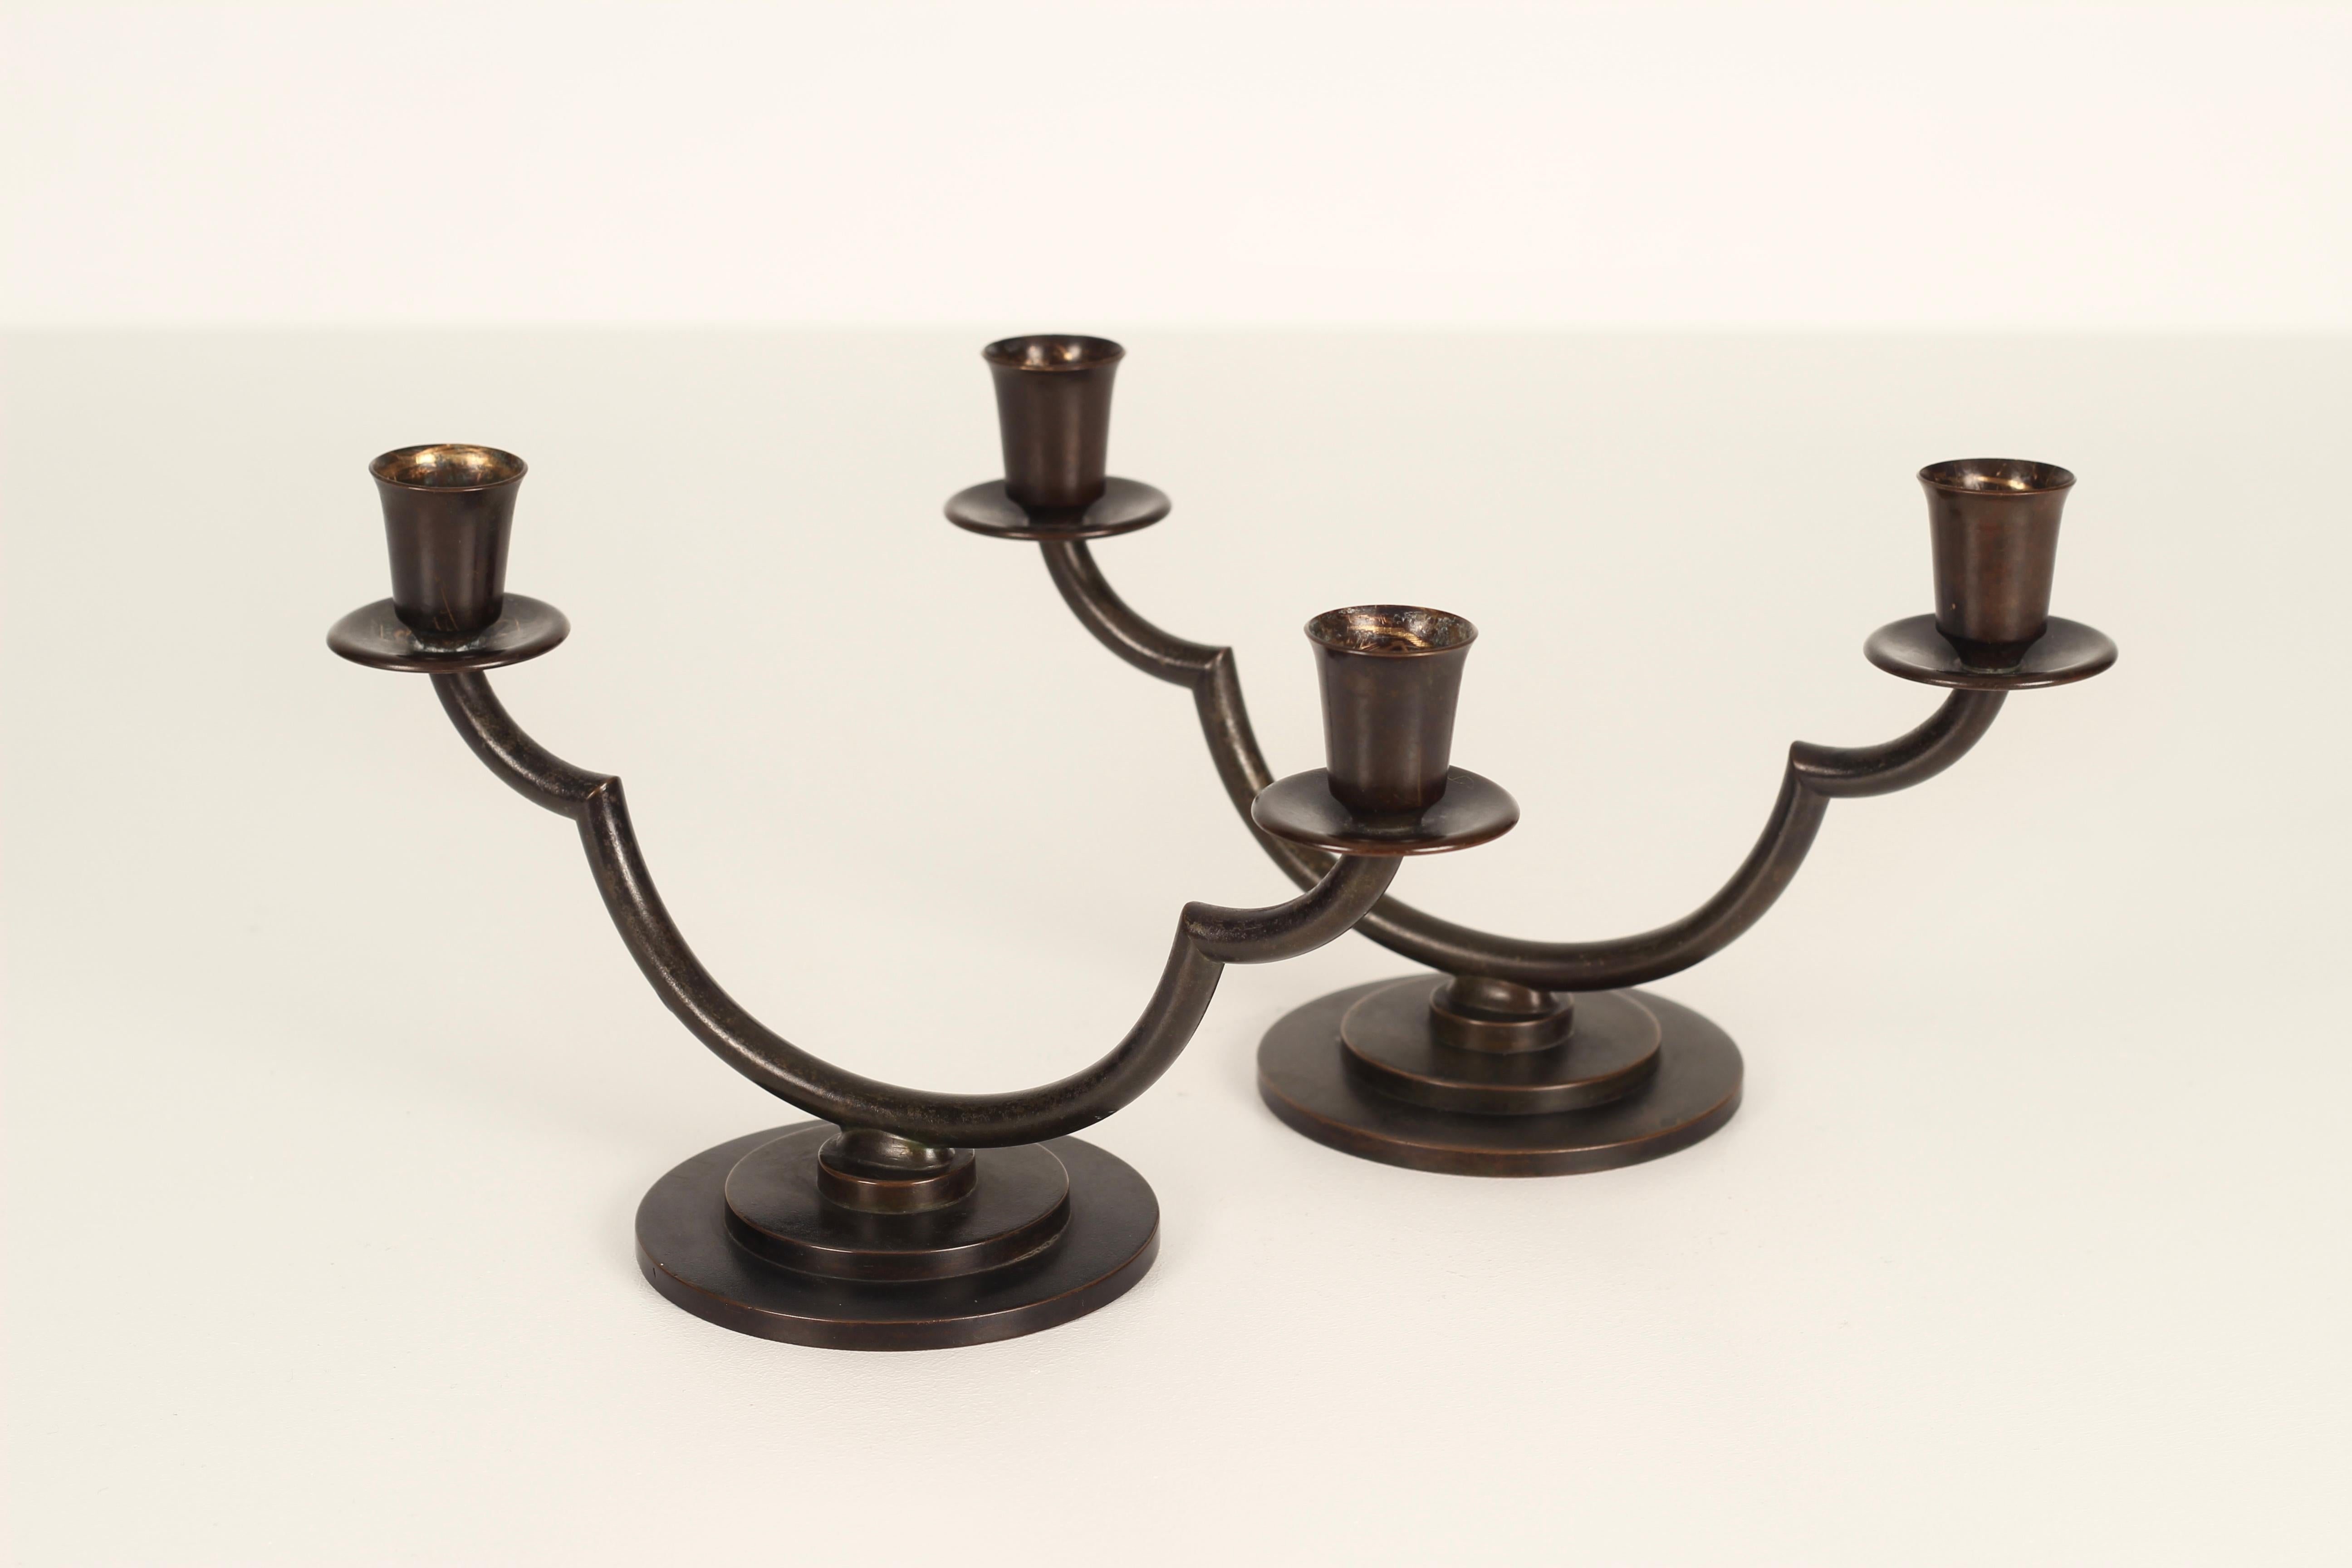 A pair of Art Deco candlesticks 1930s designed by Danish artist Just Andersen (1884-1943) The candlesticks have model no. LB 1476 and are made of Just Andersen´s own disco metal with brown patina.

Signed with monogram for Just Andersen and no LB